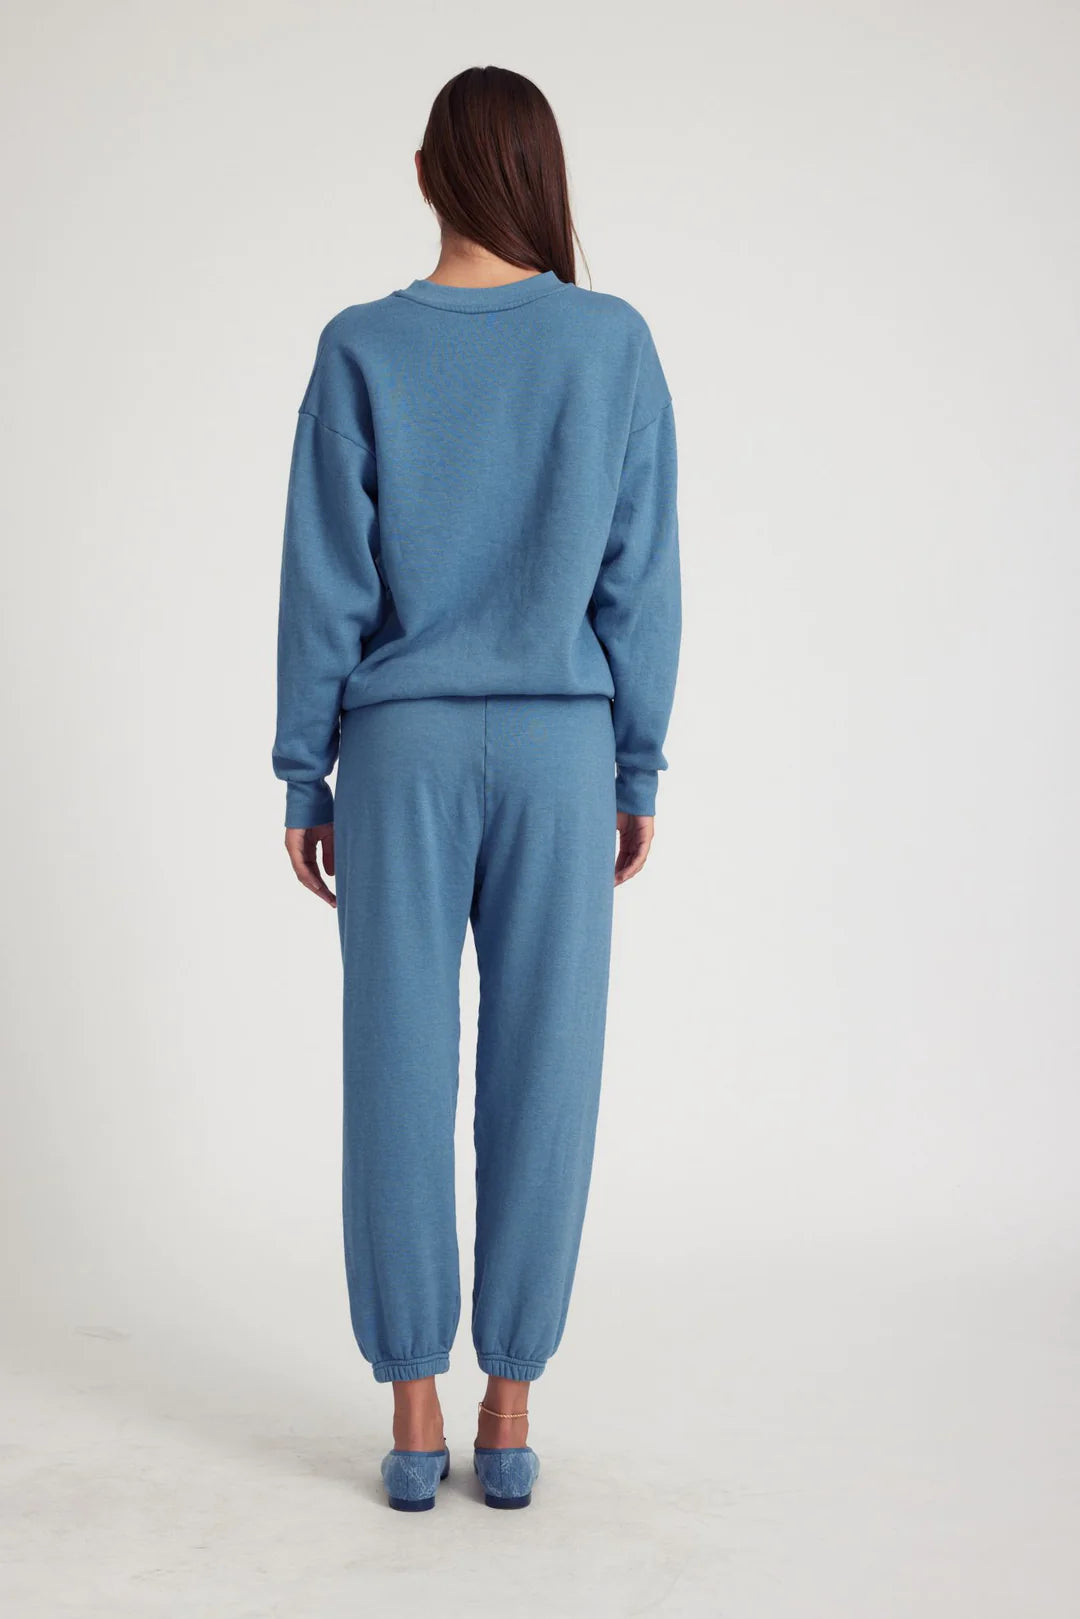 Heart Sweatpant in Chambray Blue